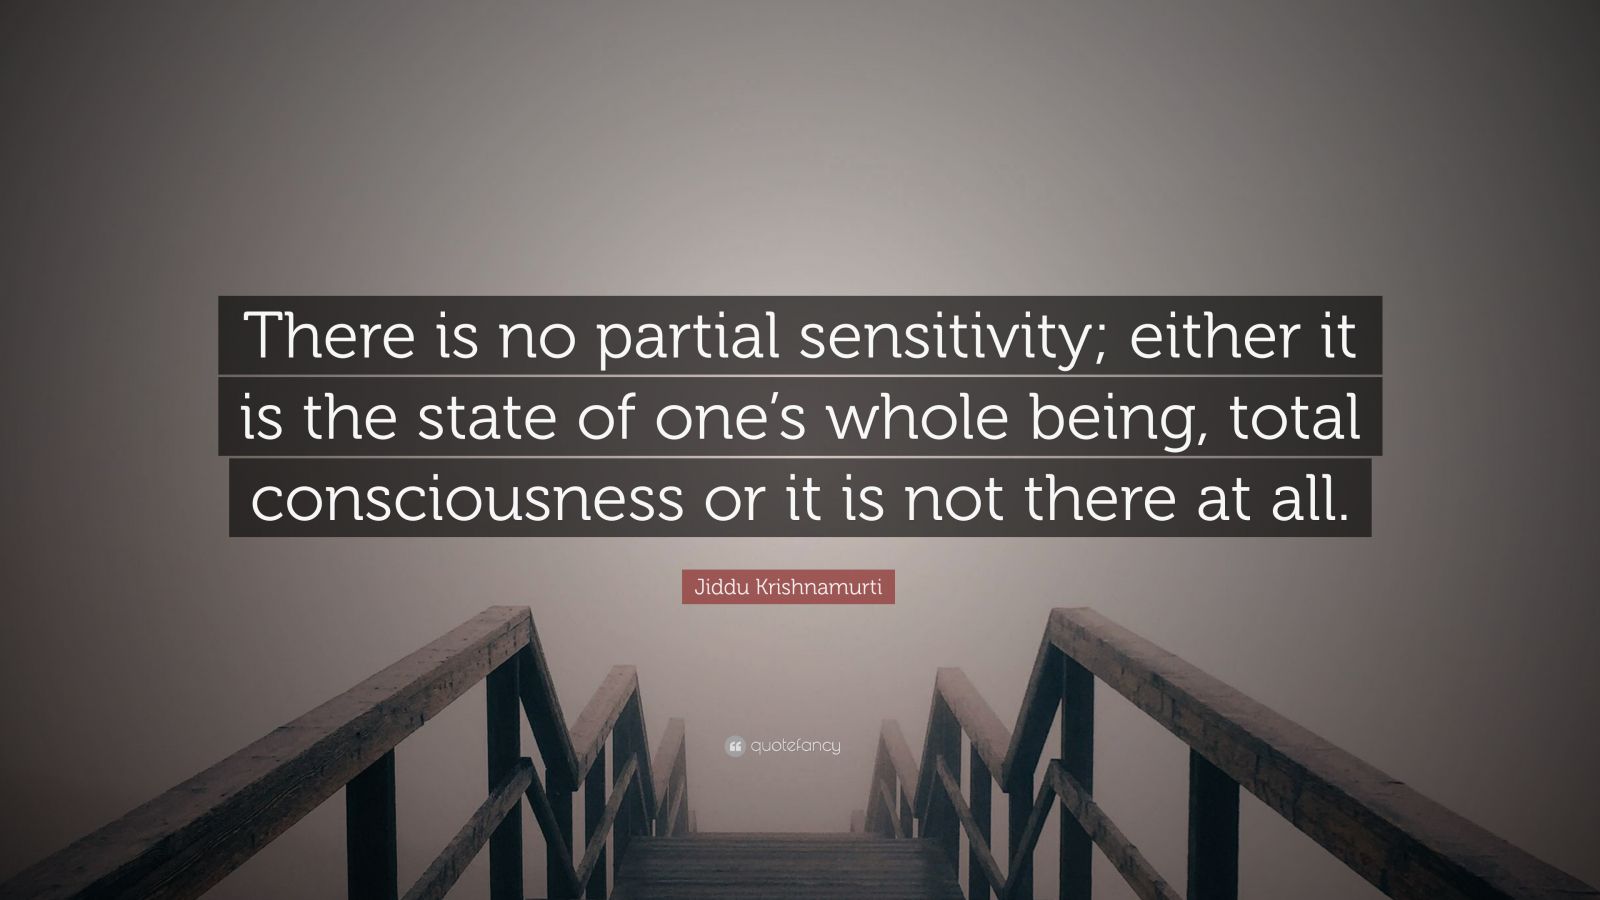 Jiddu Krishnamurti Quote “there Is No Partial Sensitivity Either It